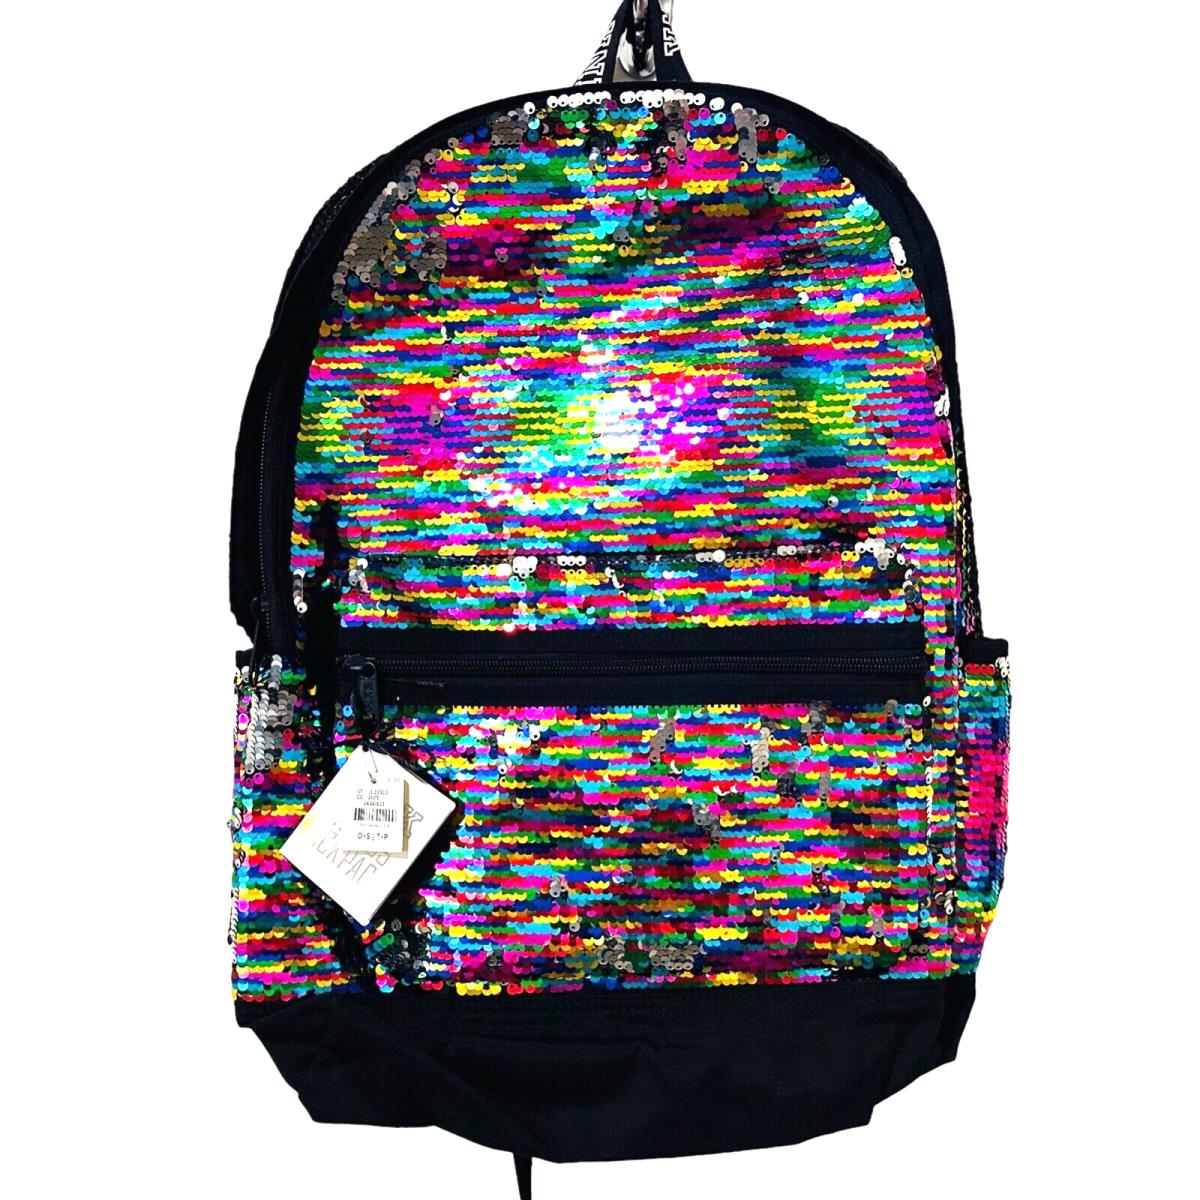 Victoria`s Secret Pink Campus Backpack Bling Rainbow Sequins Bag Tote Rare